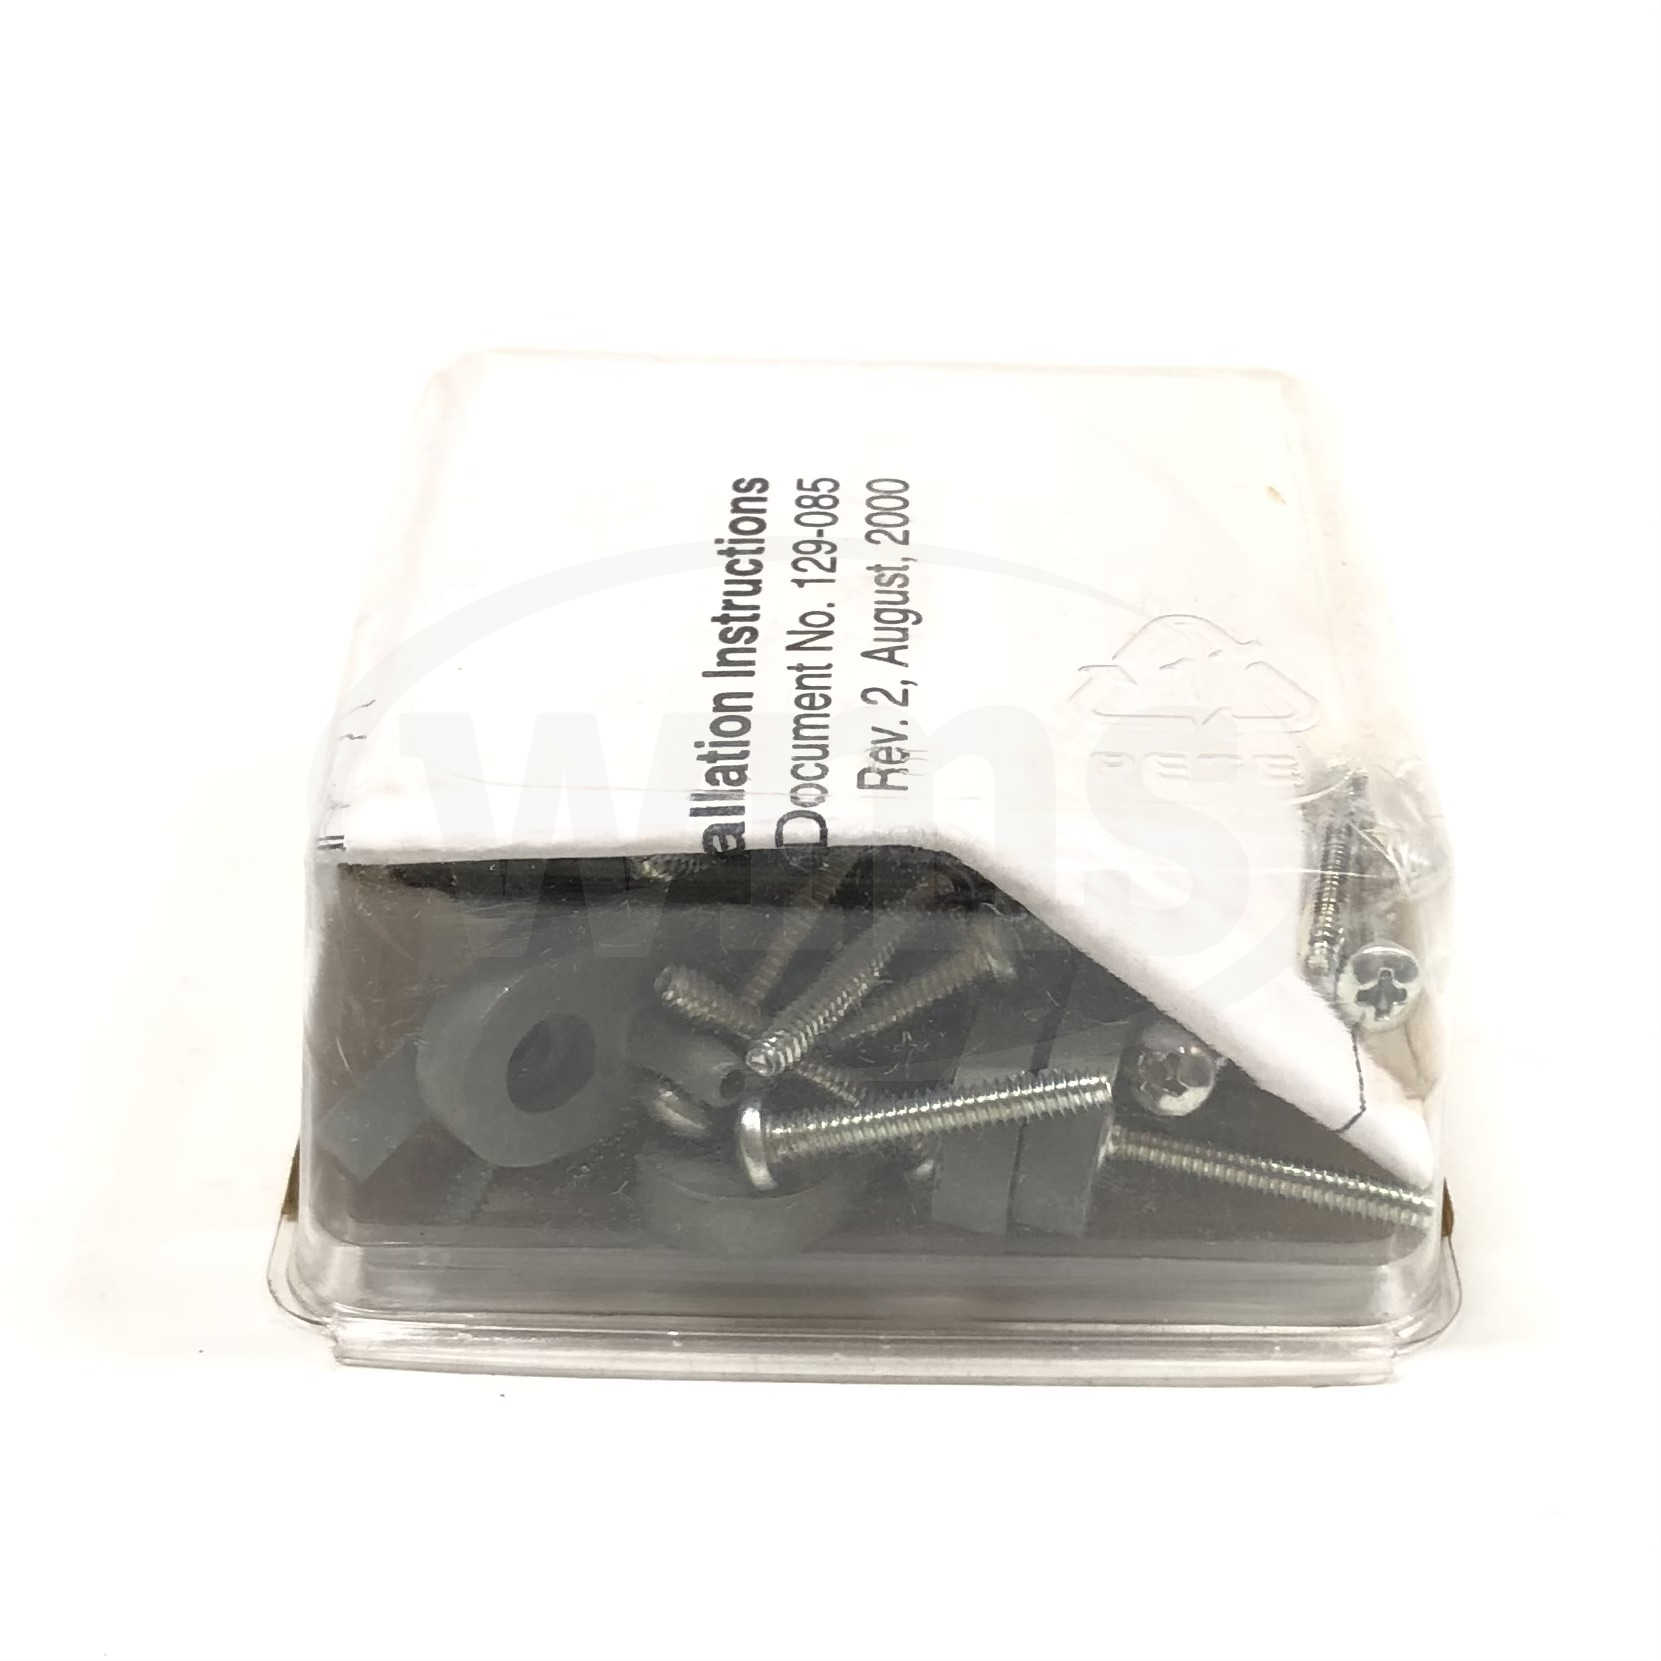 192-525 Siemens TH19X Repair Kit Chassis Connector And Screws 10 Pieces 2